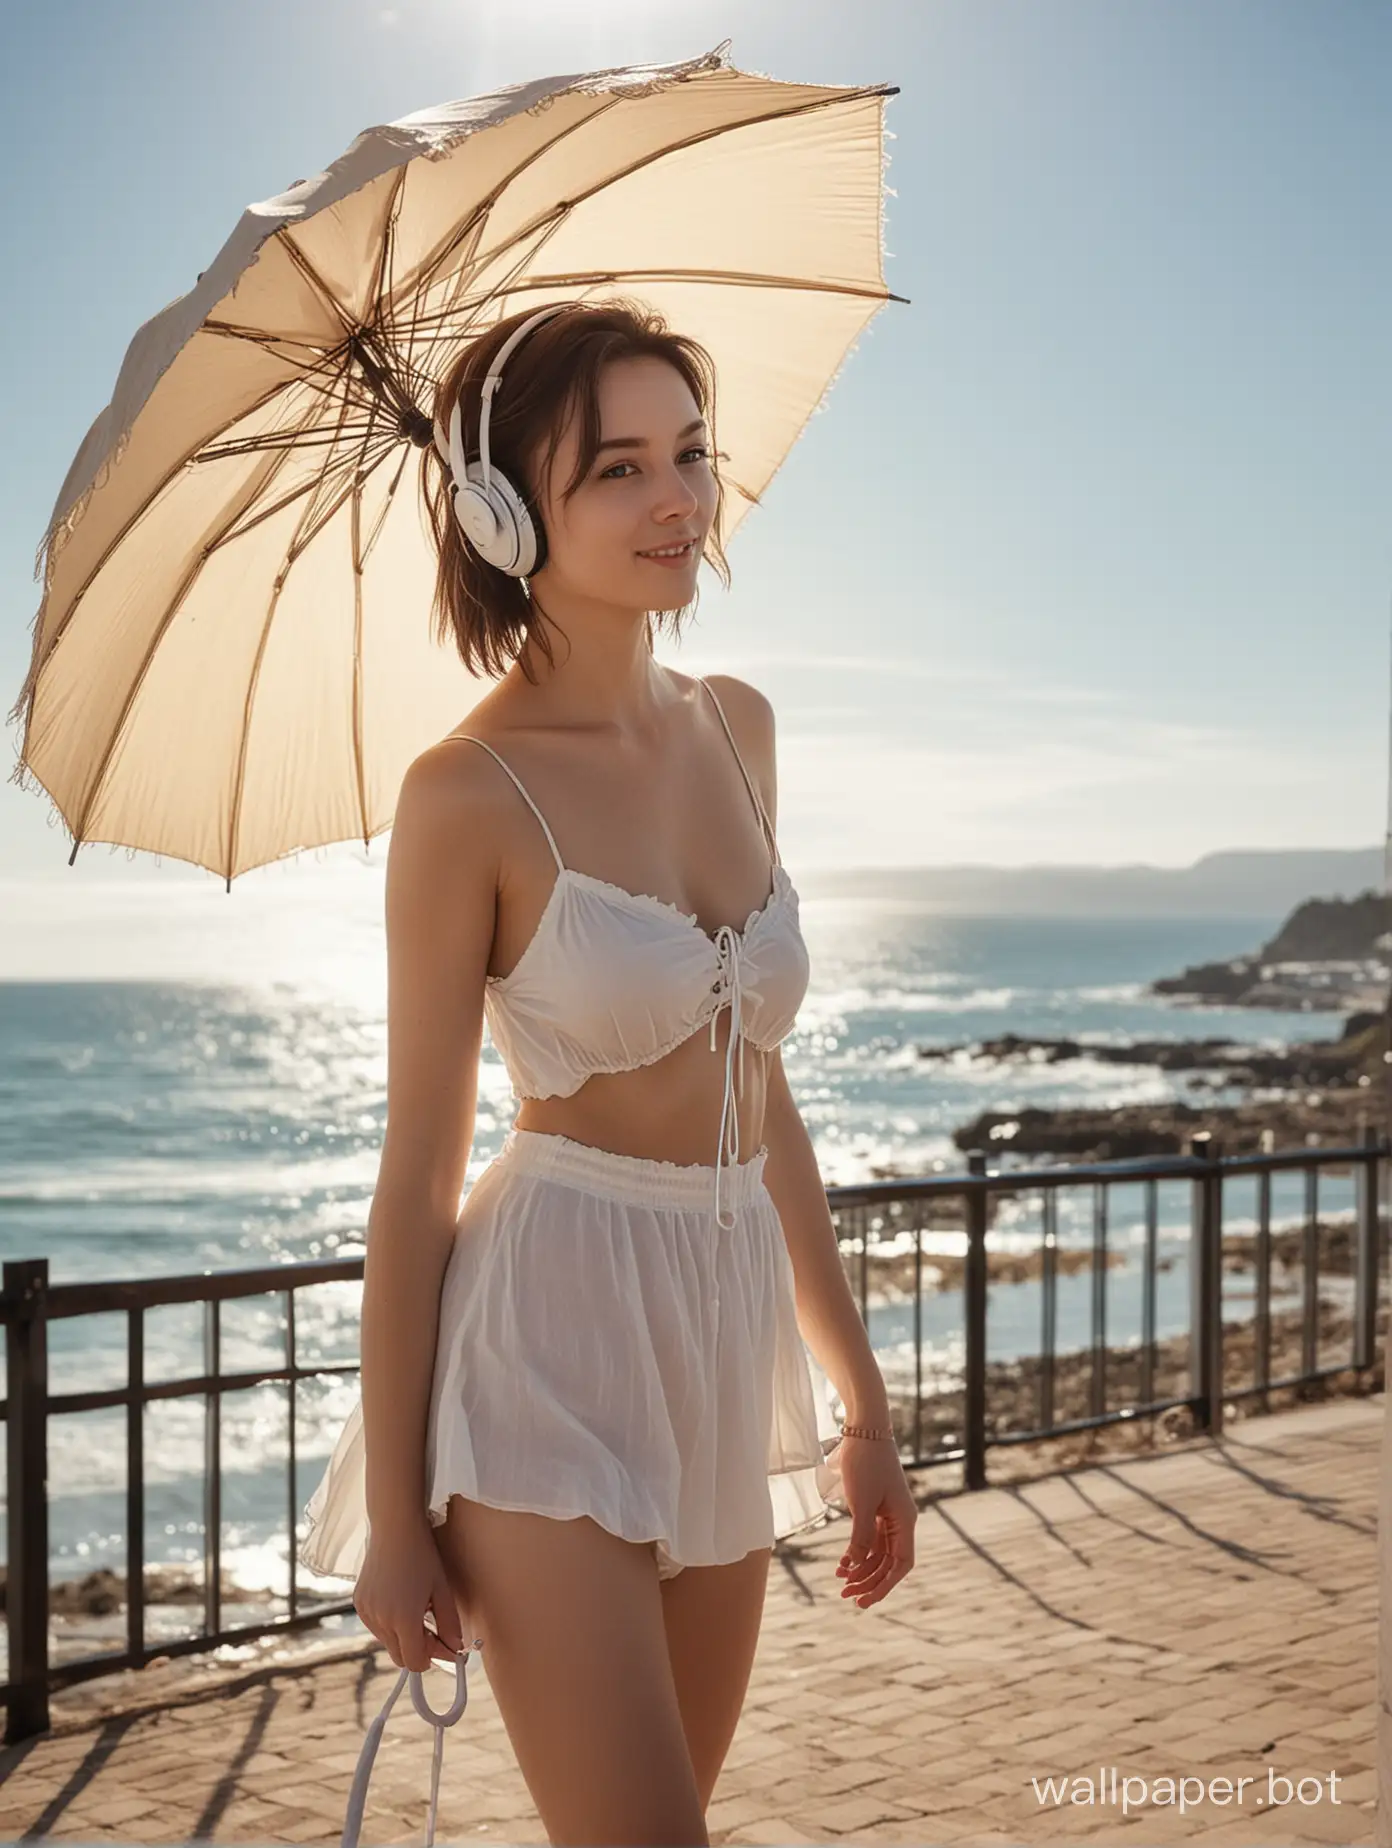 Girl with headphones walking the sunny day with an umbrella at ocean side view, small tits bust